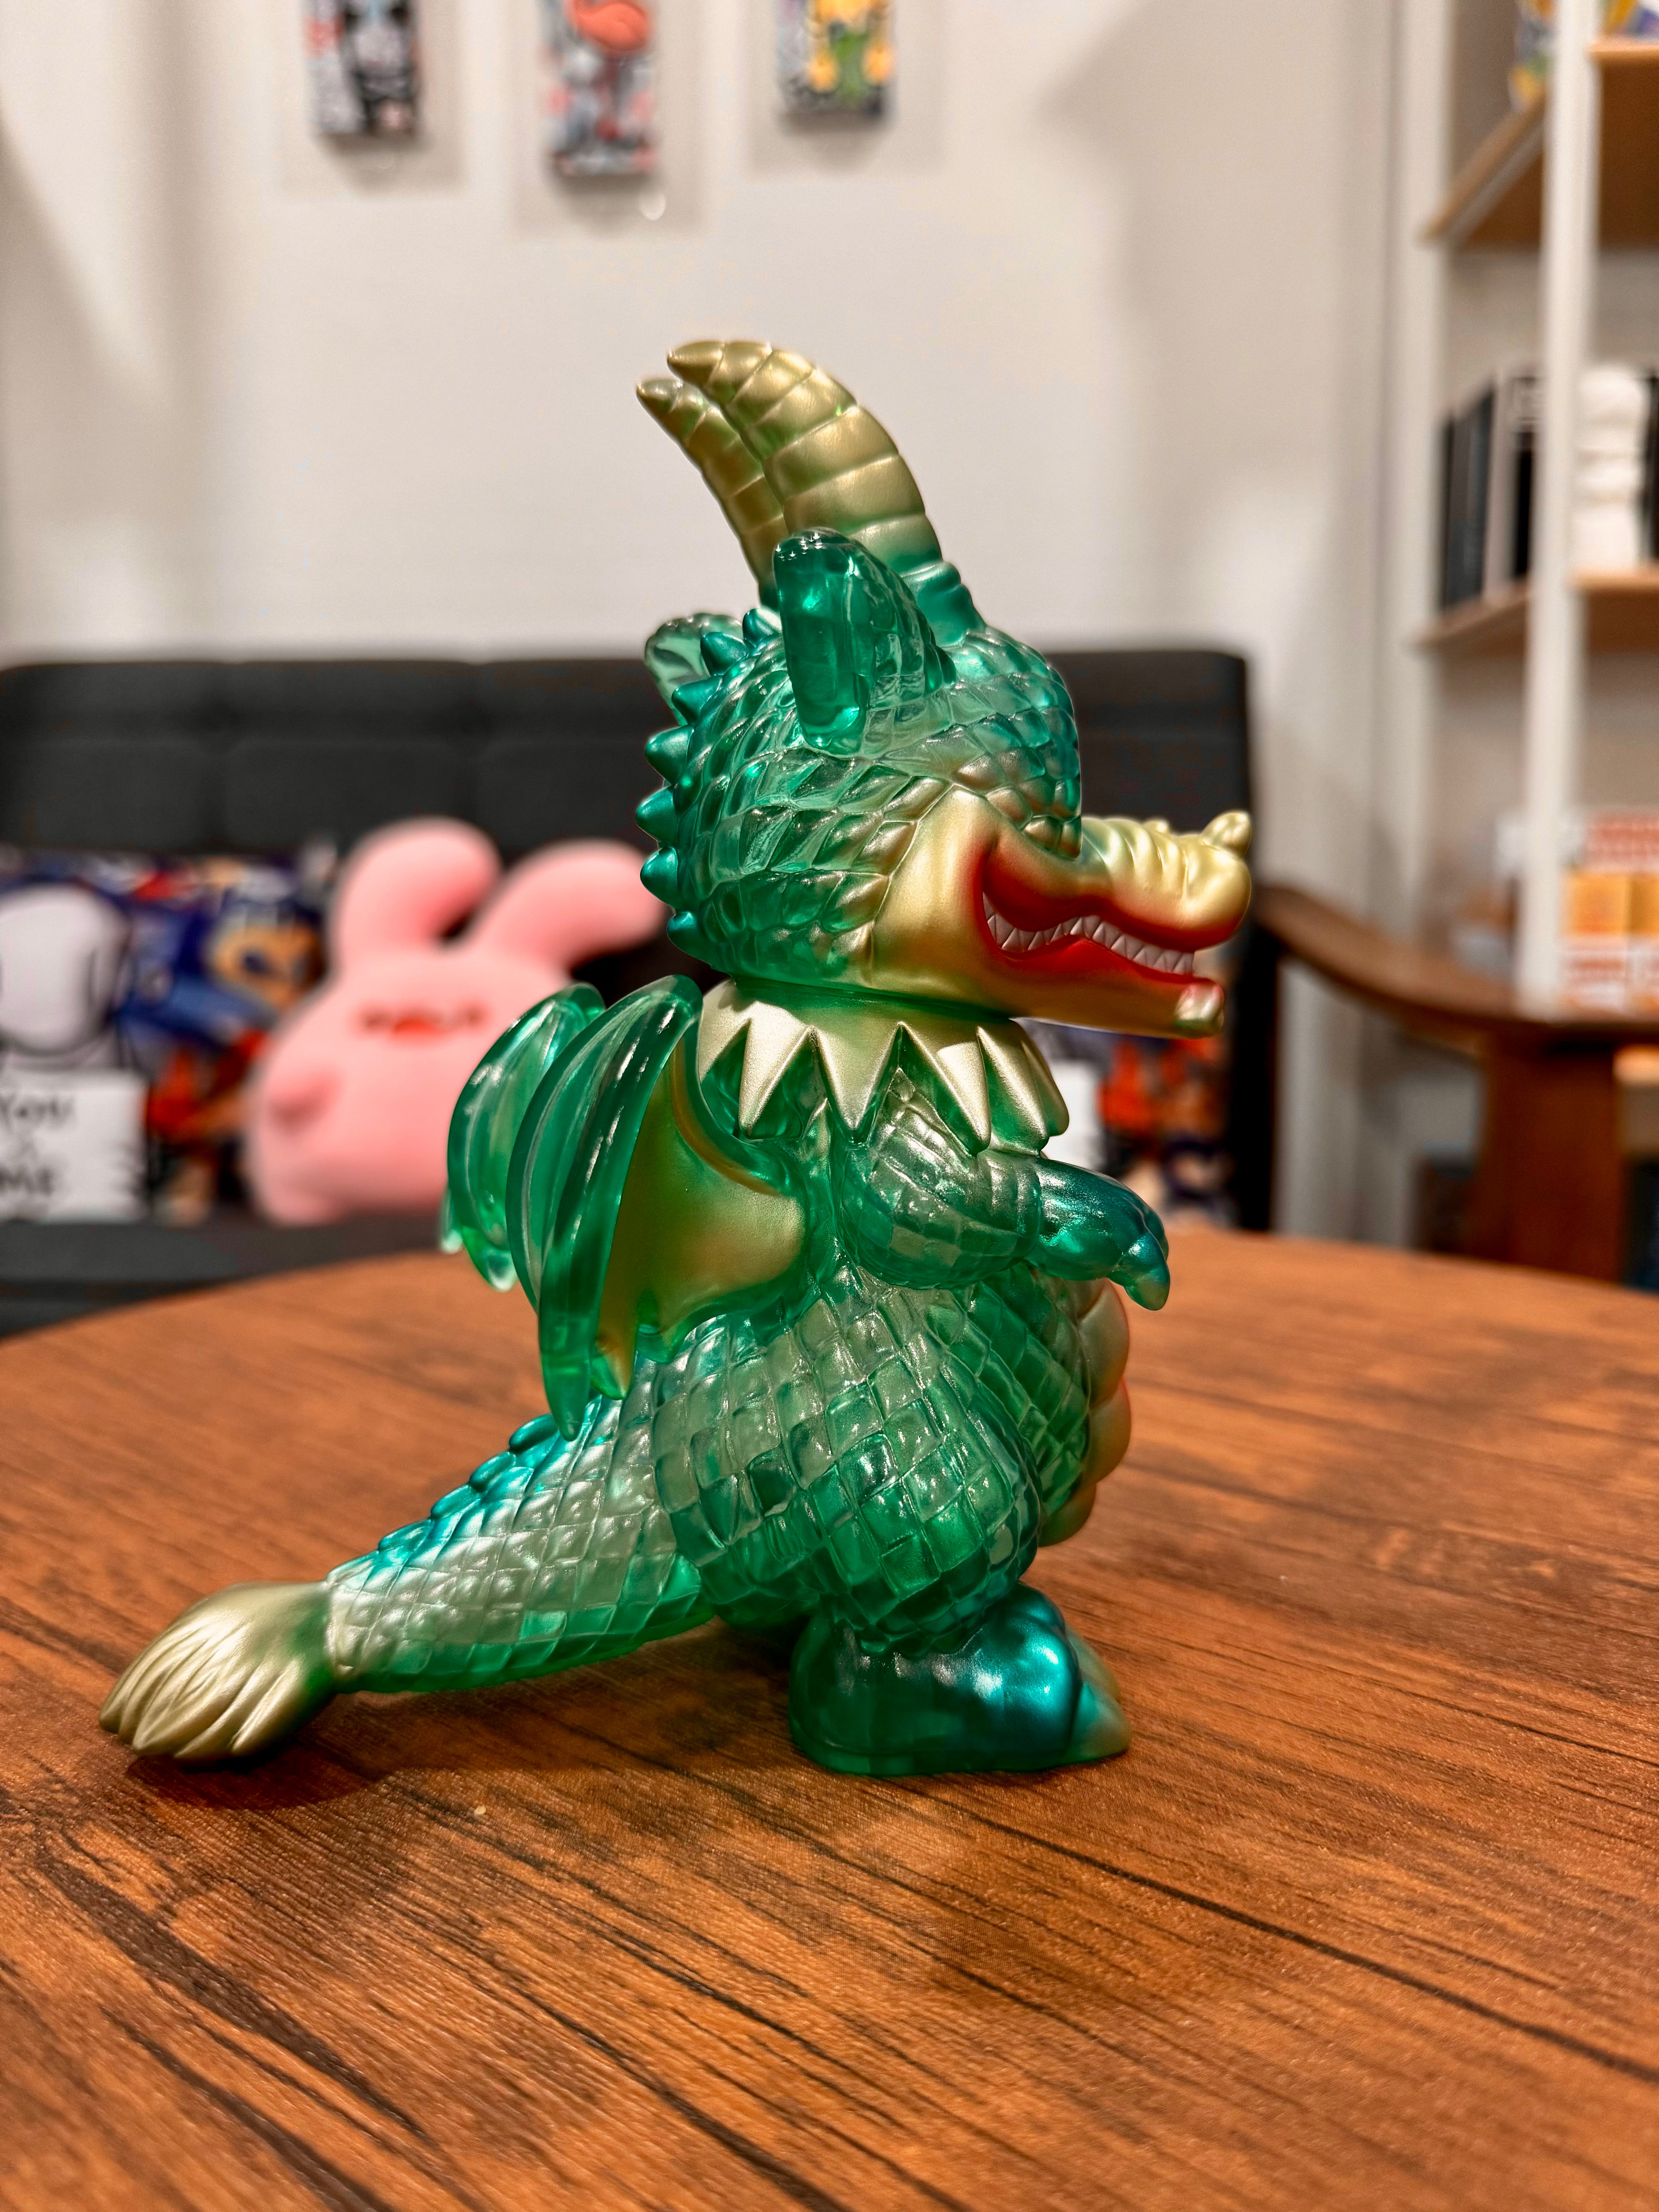 A green and gold dragon figurine, Calm Dragon Clear Mint by Art Junkie, displayed on a table. From Strangecat Toys, a blind box and art toy store.